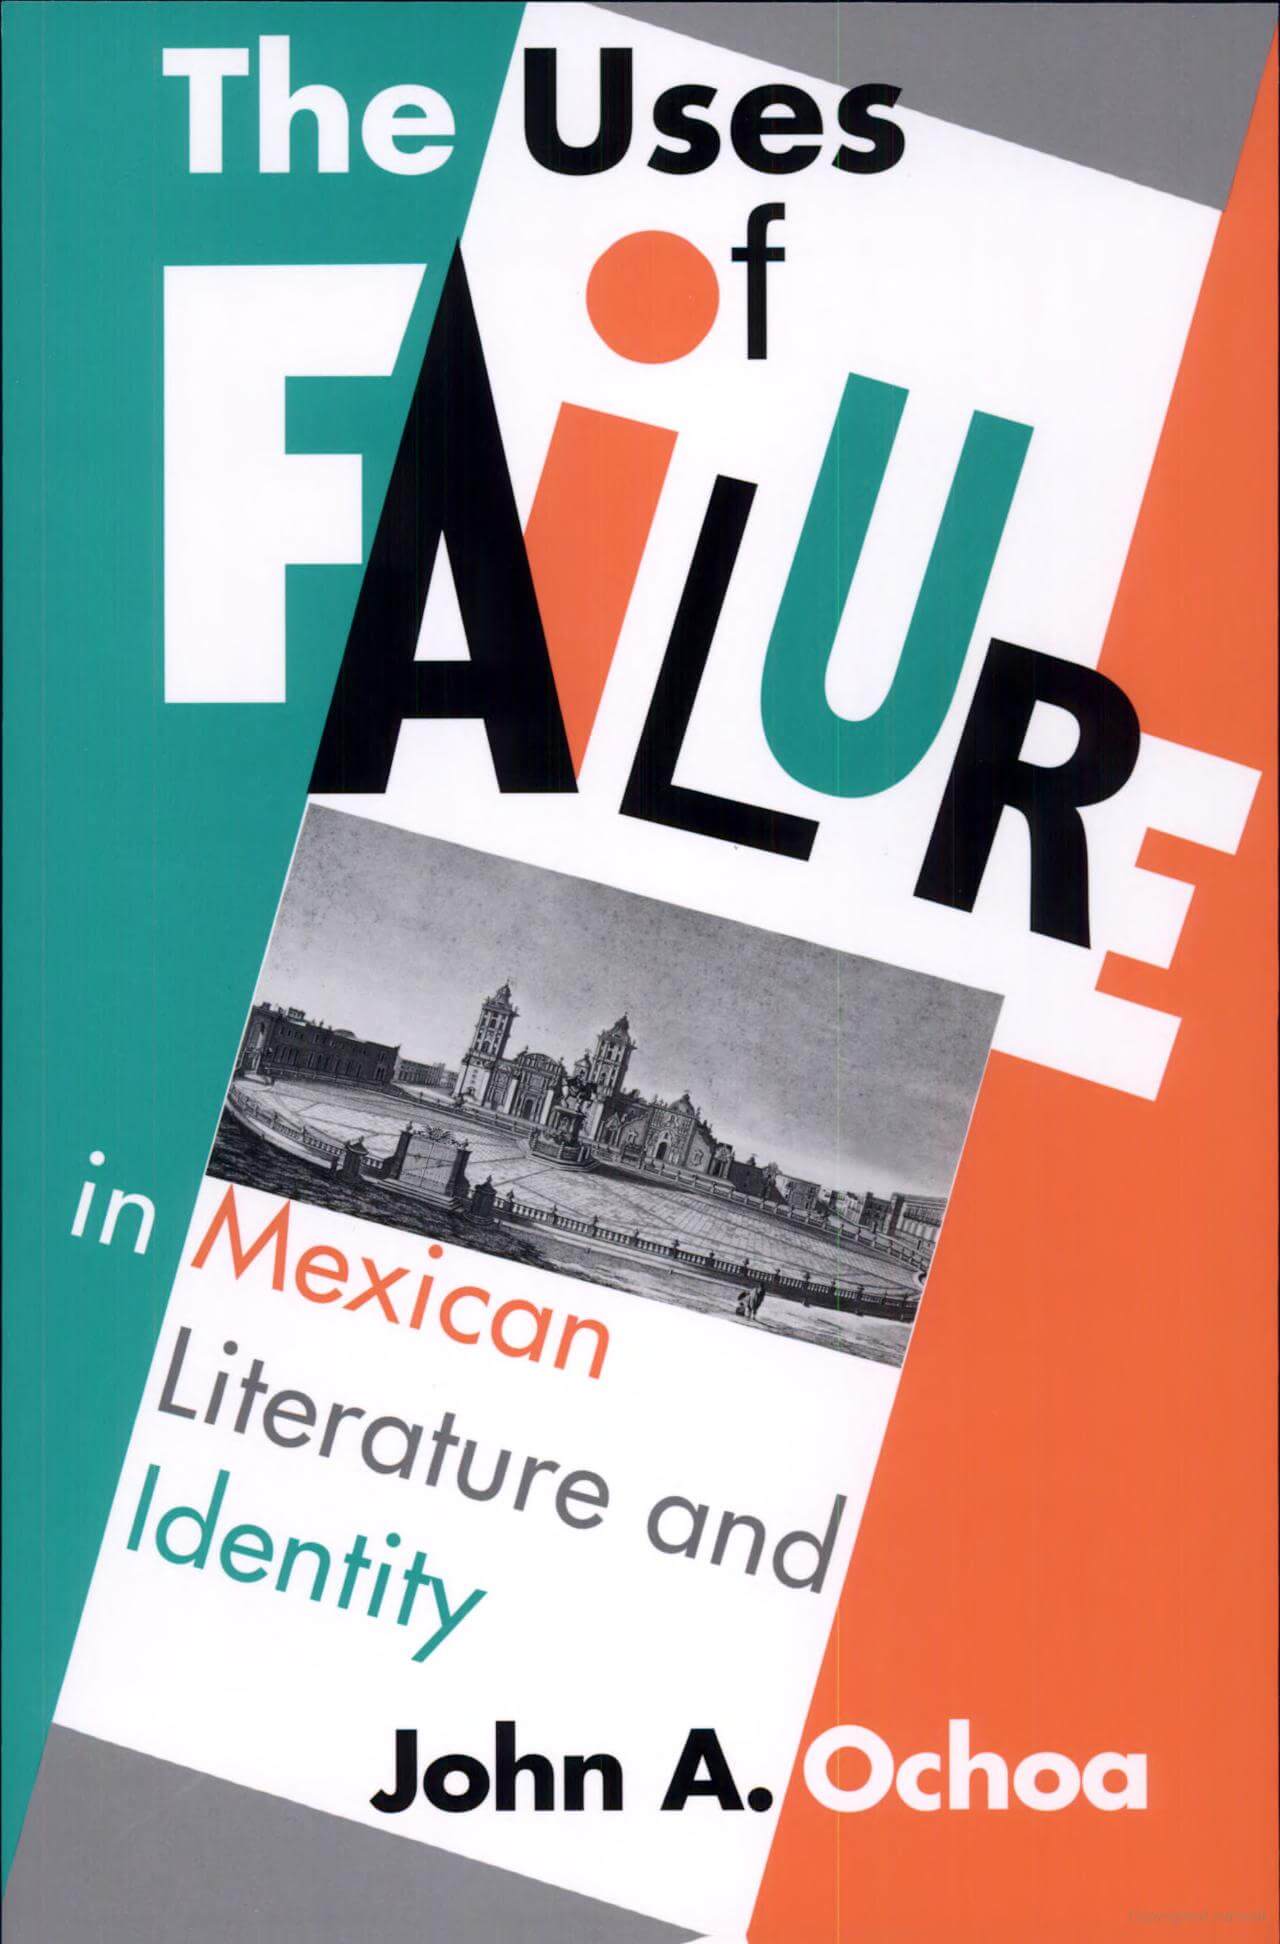 The Uses of Failure in Mexican Literature and Identity